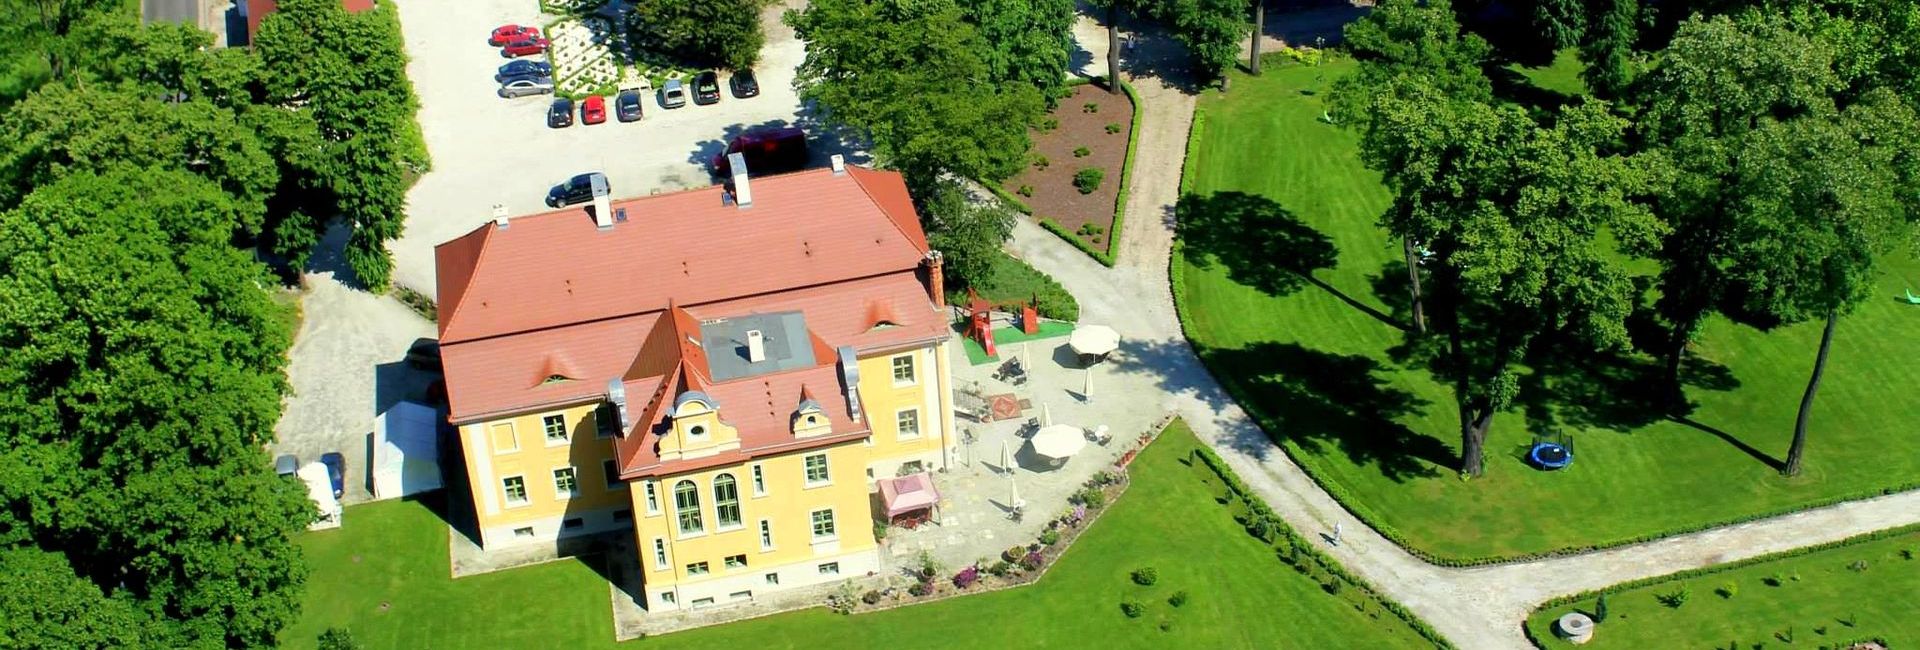 Airshot of Wiechlice Palace in Silesia